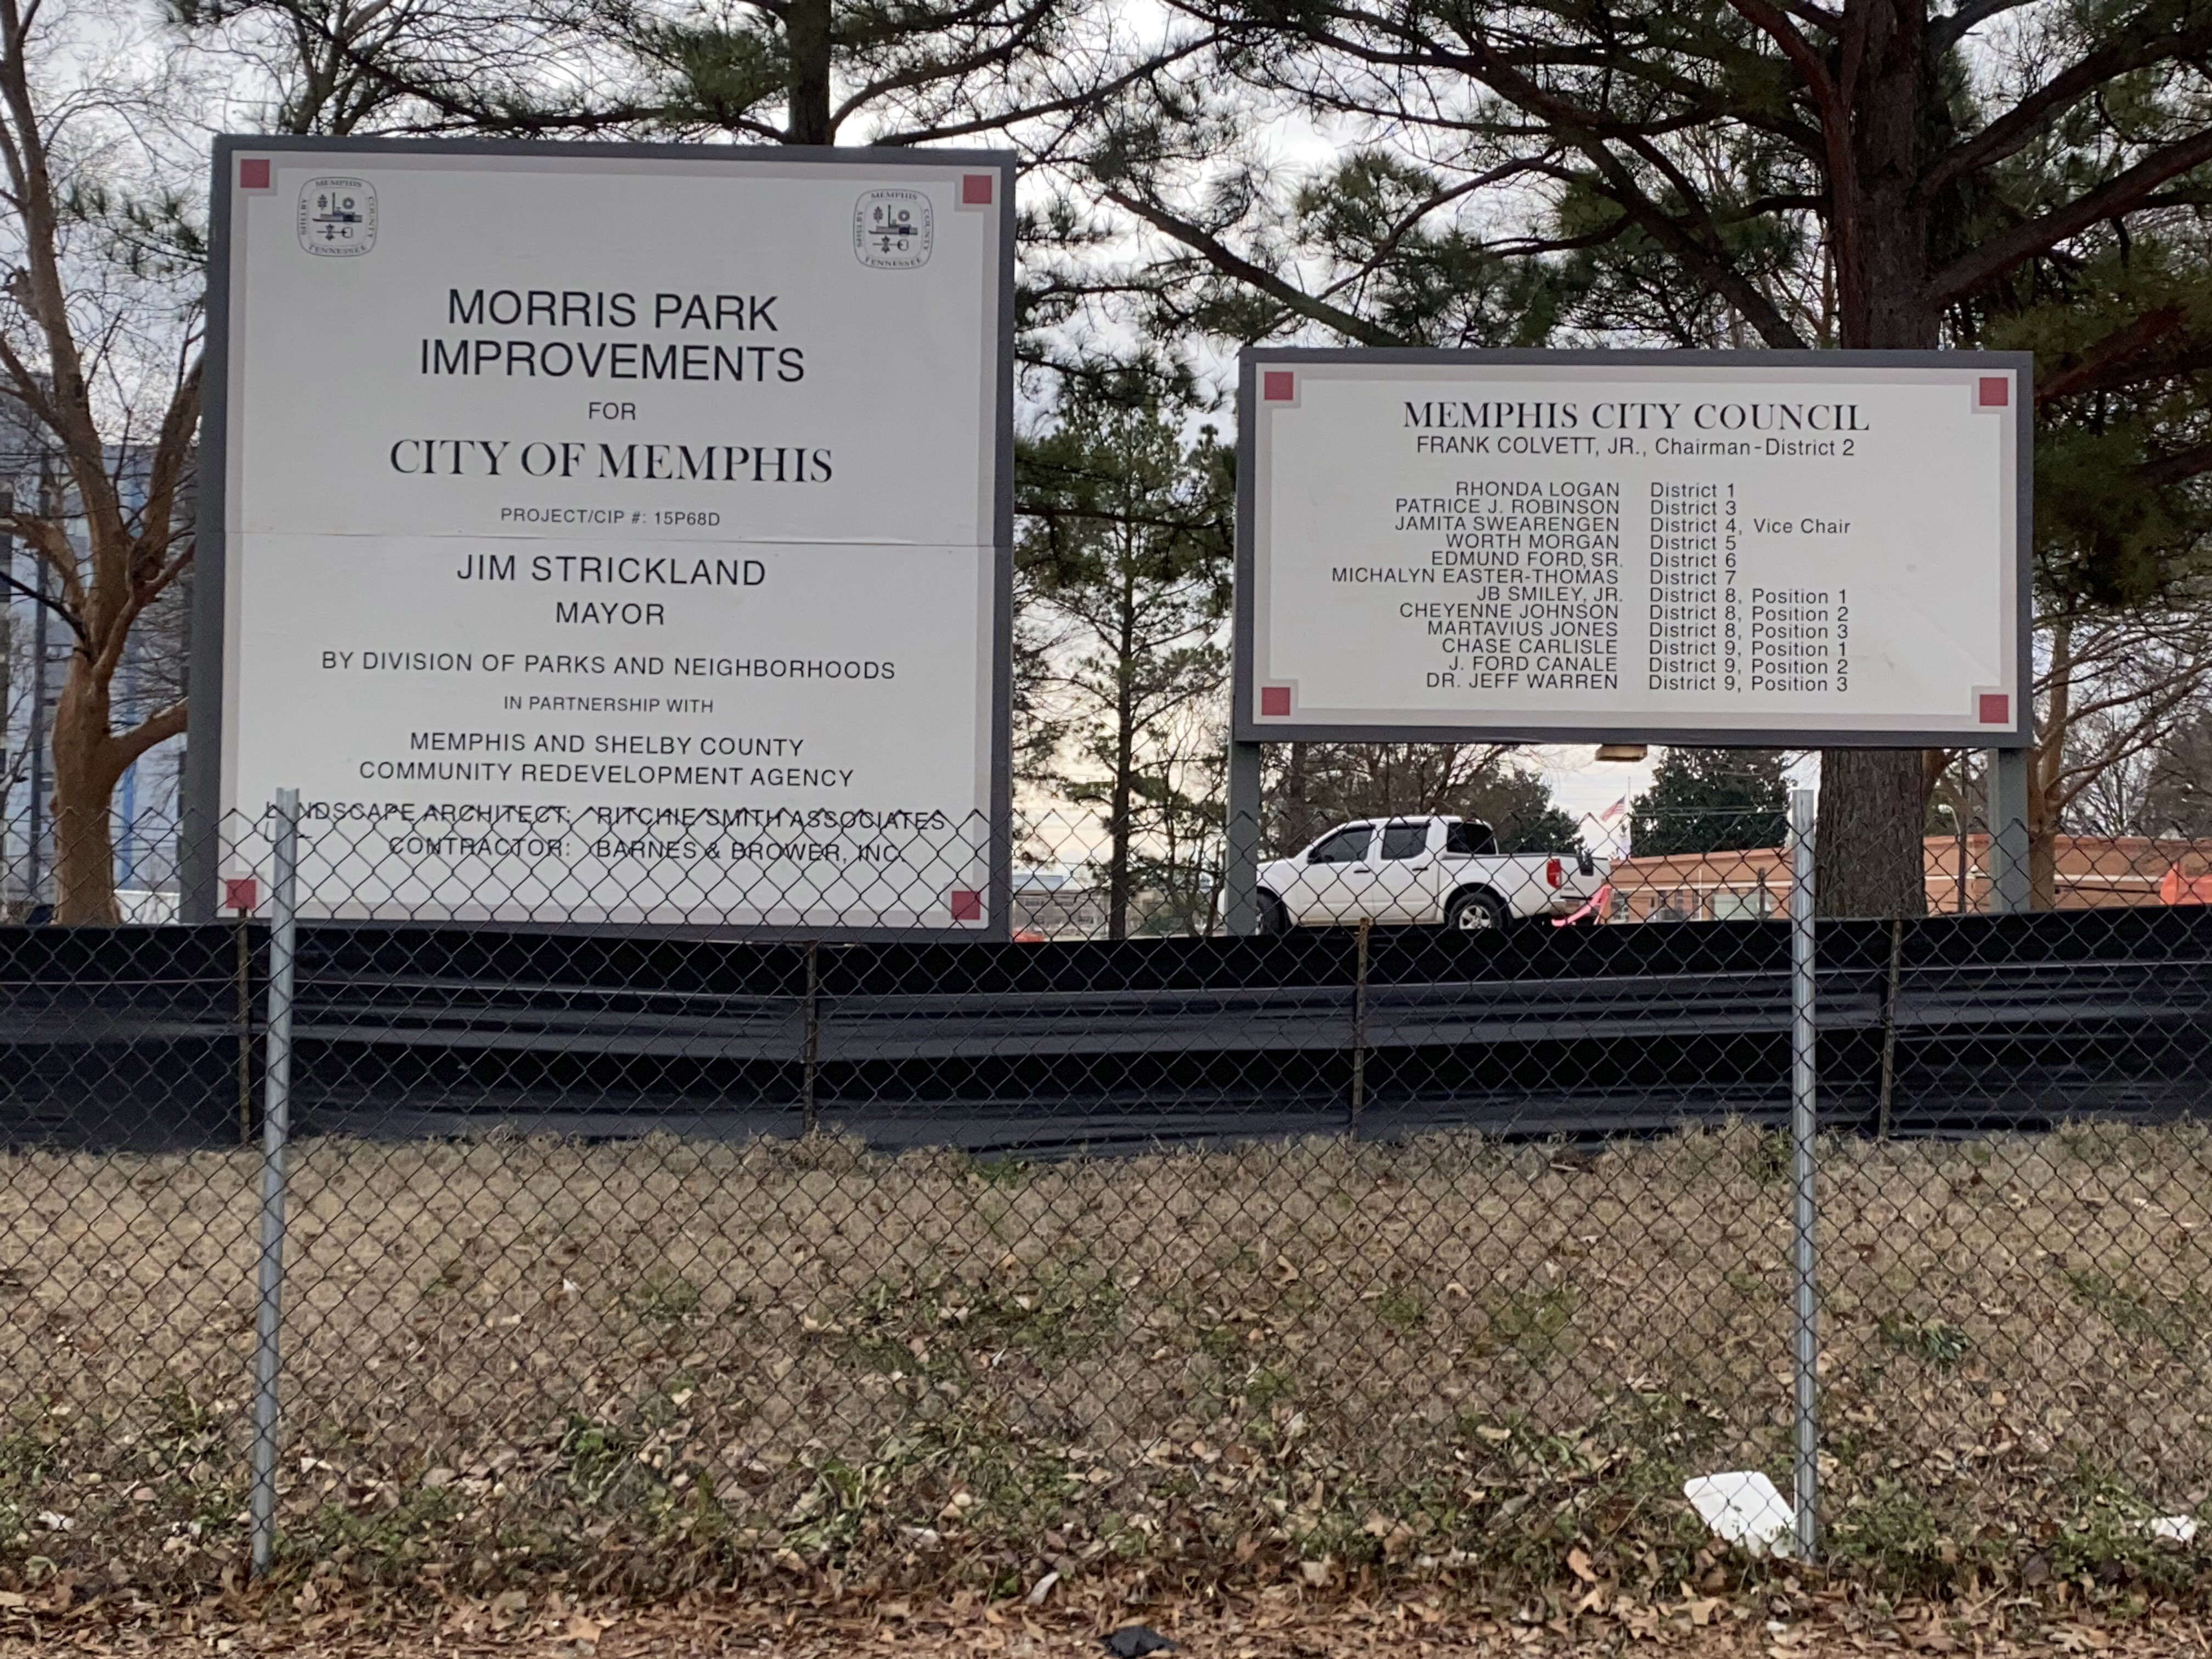 Improvements to Morris Park were underway in January 2022. (Shelia Williams)